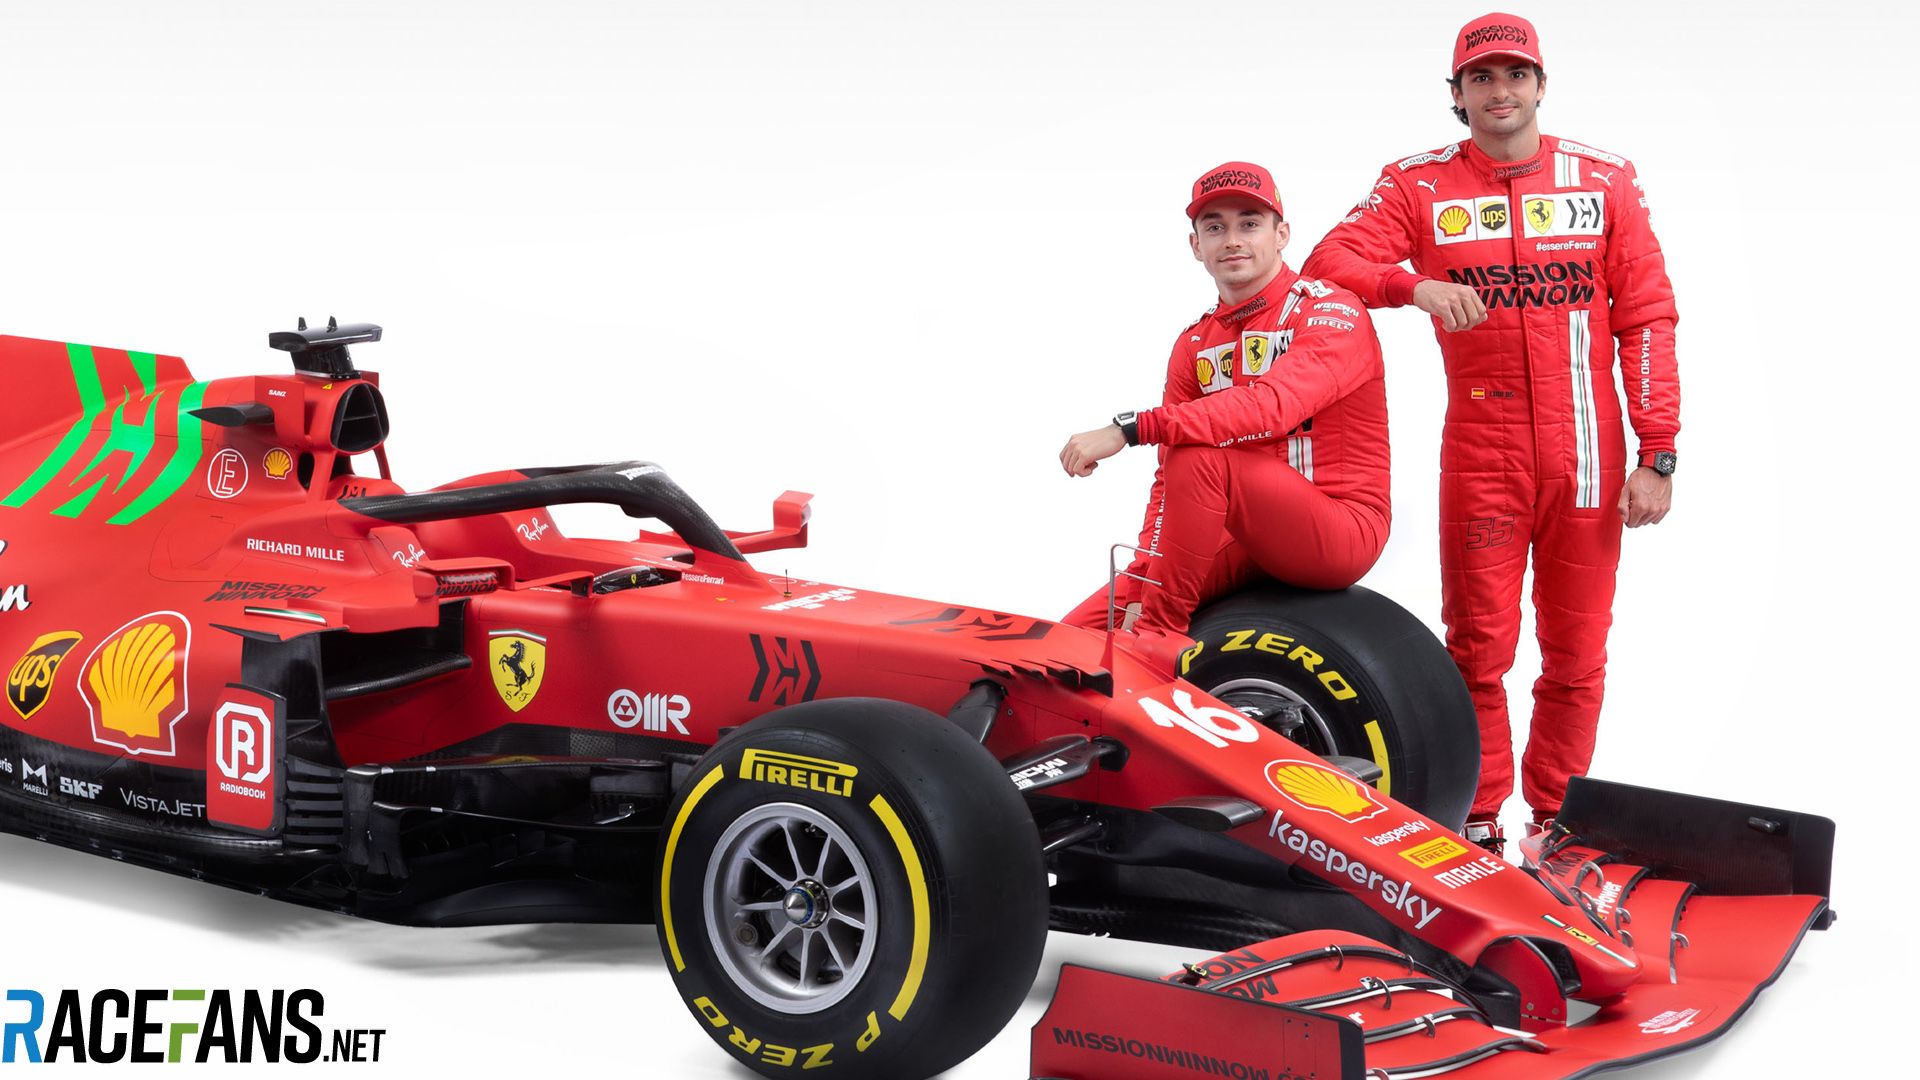 First picture: Ferrari presents its new SF21 F1 car for 2021 · RaceFans